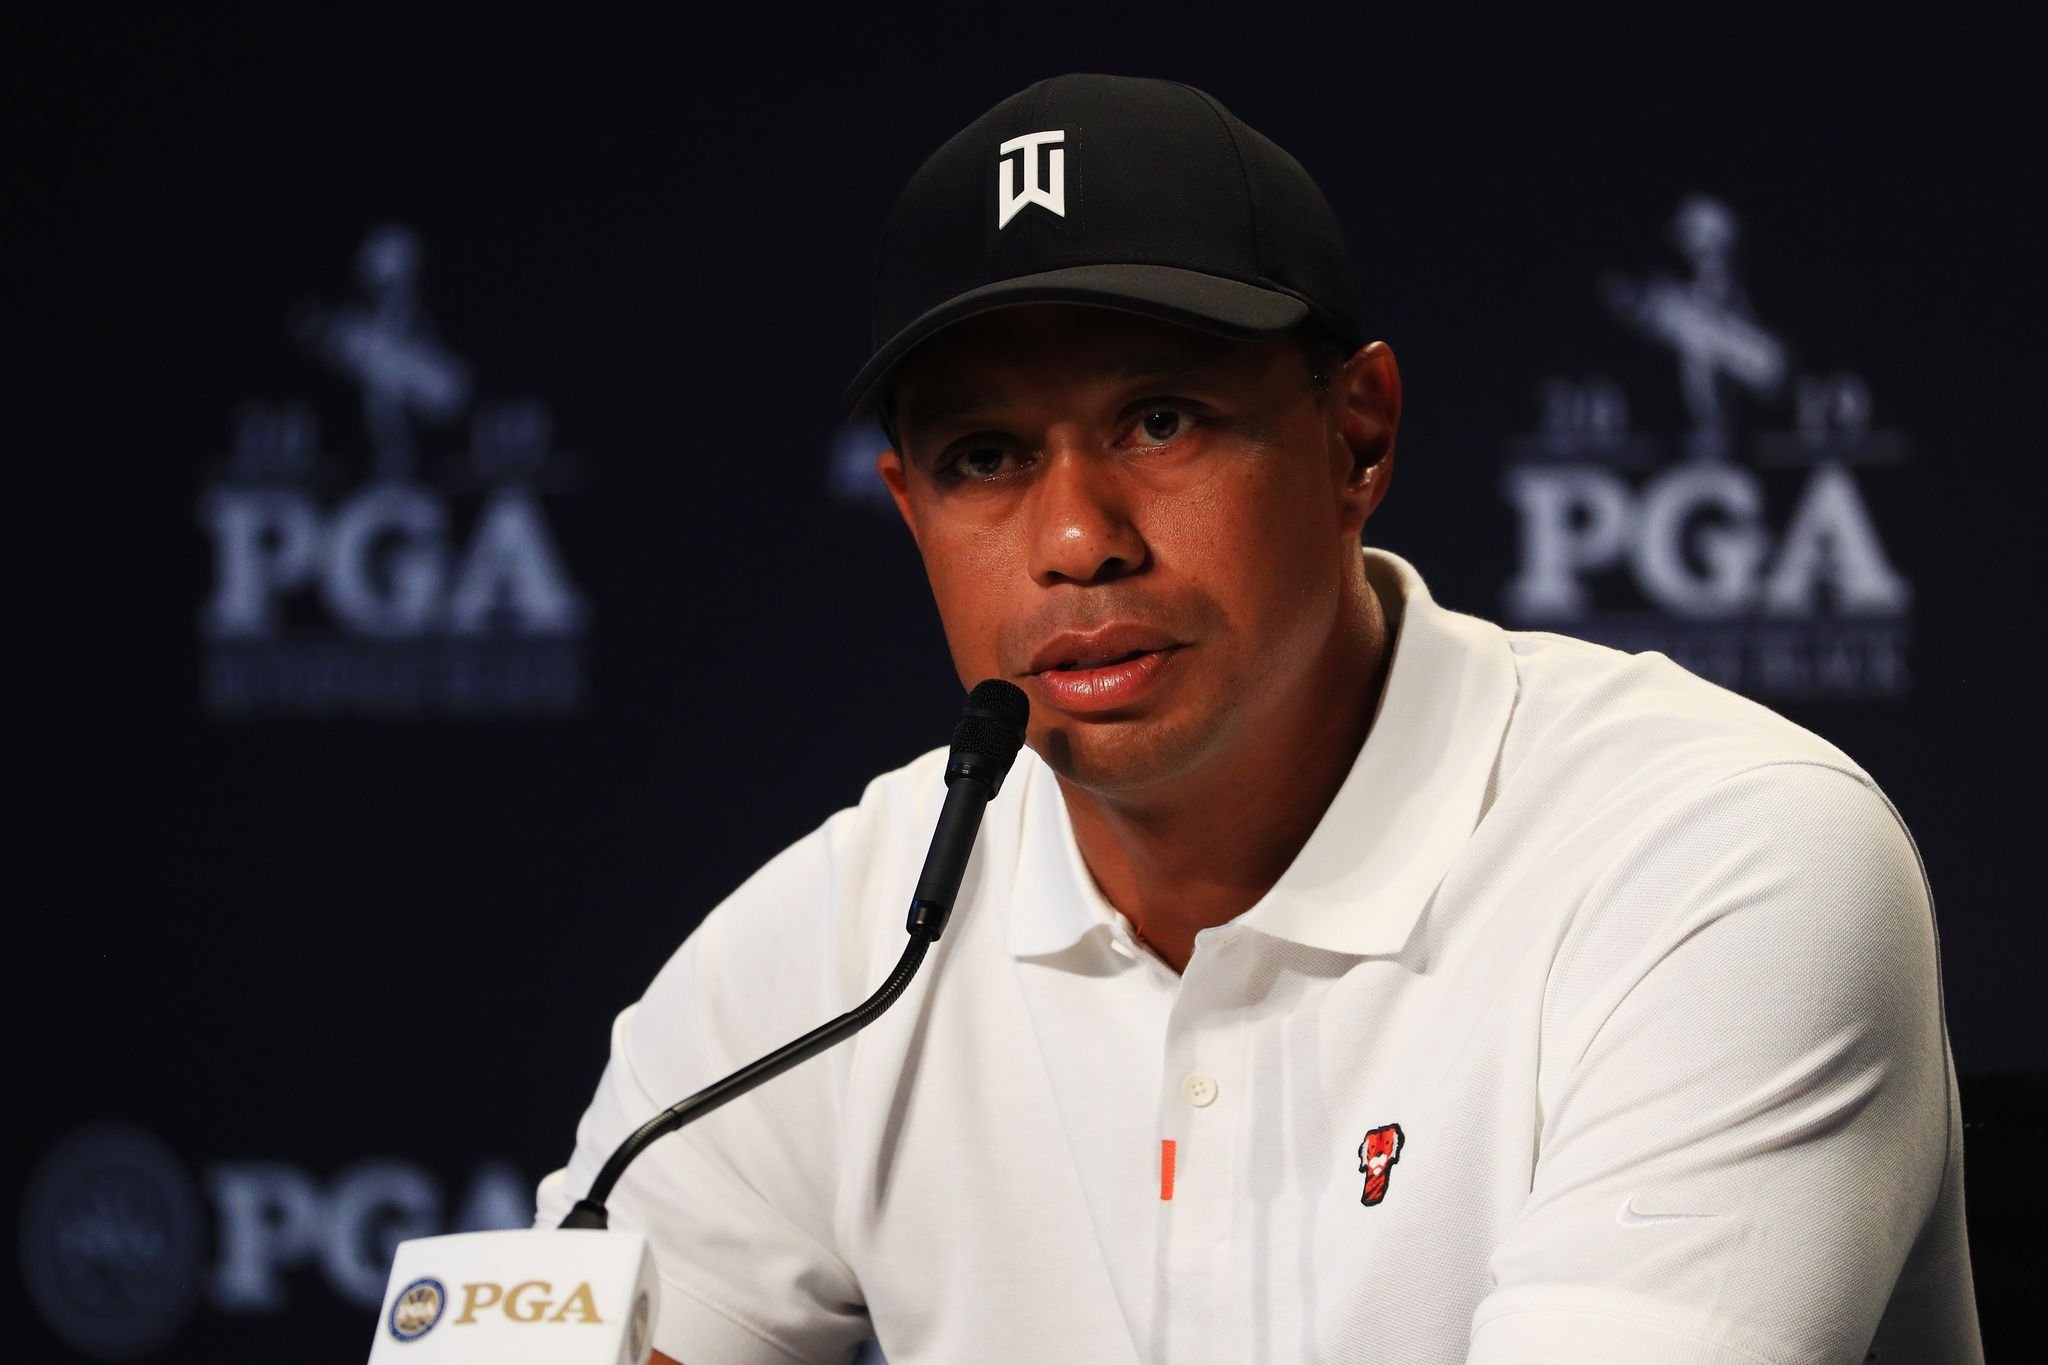 Tiger Woods at a press conference on May 14, 2019 in Bethpage. | Photo: Getty Images